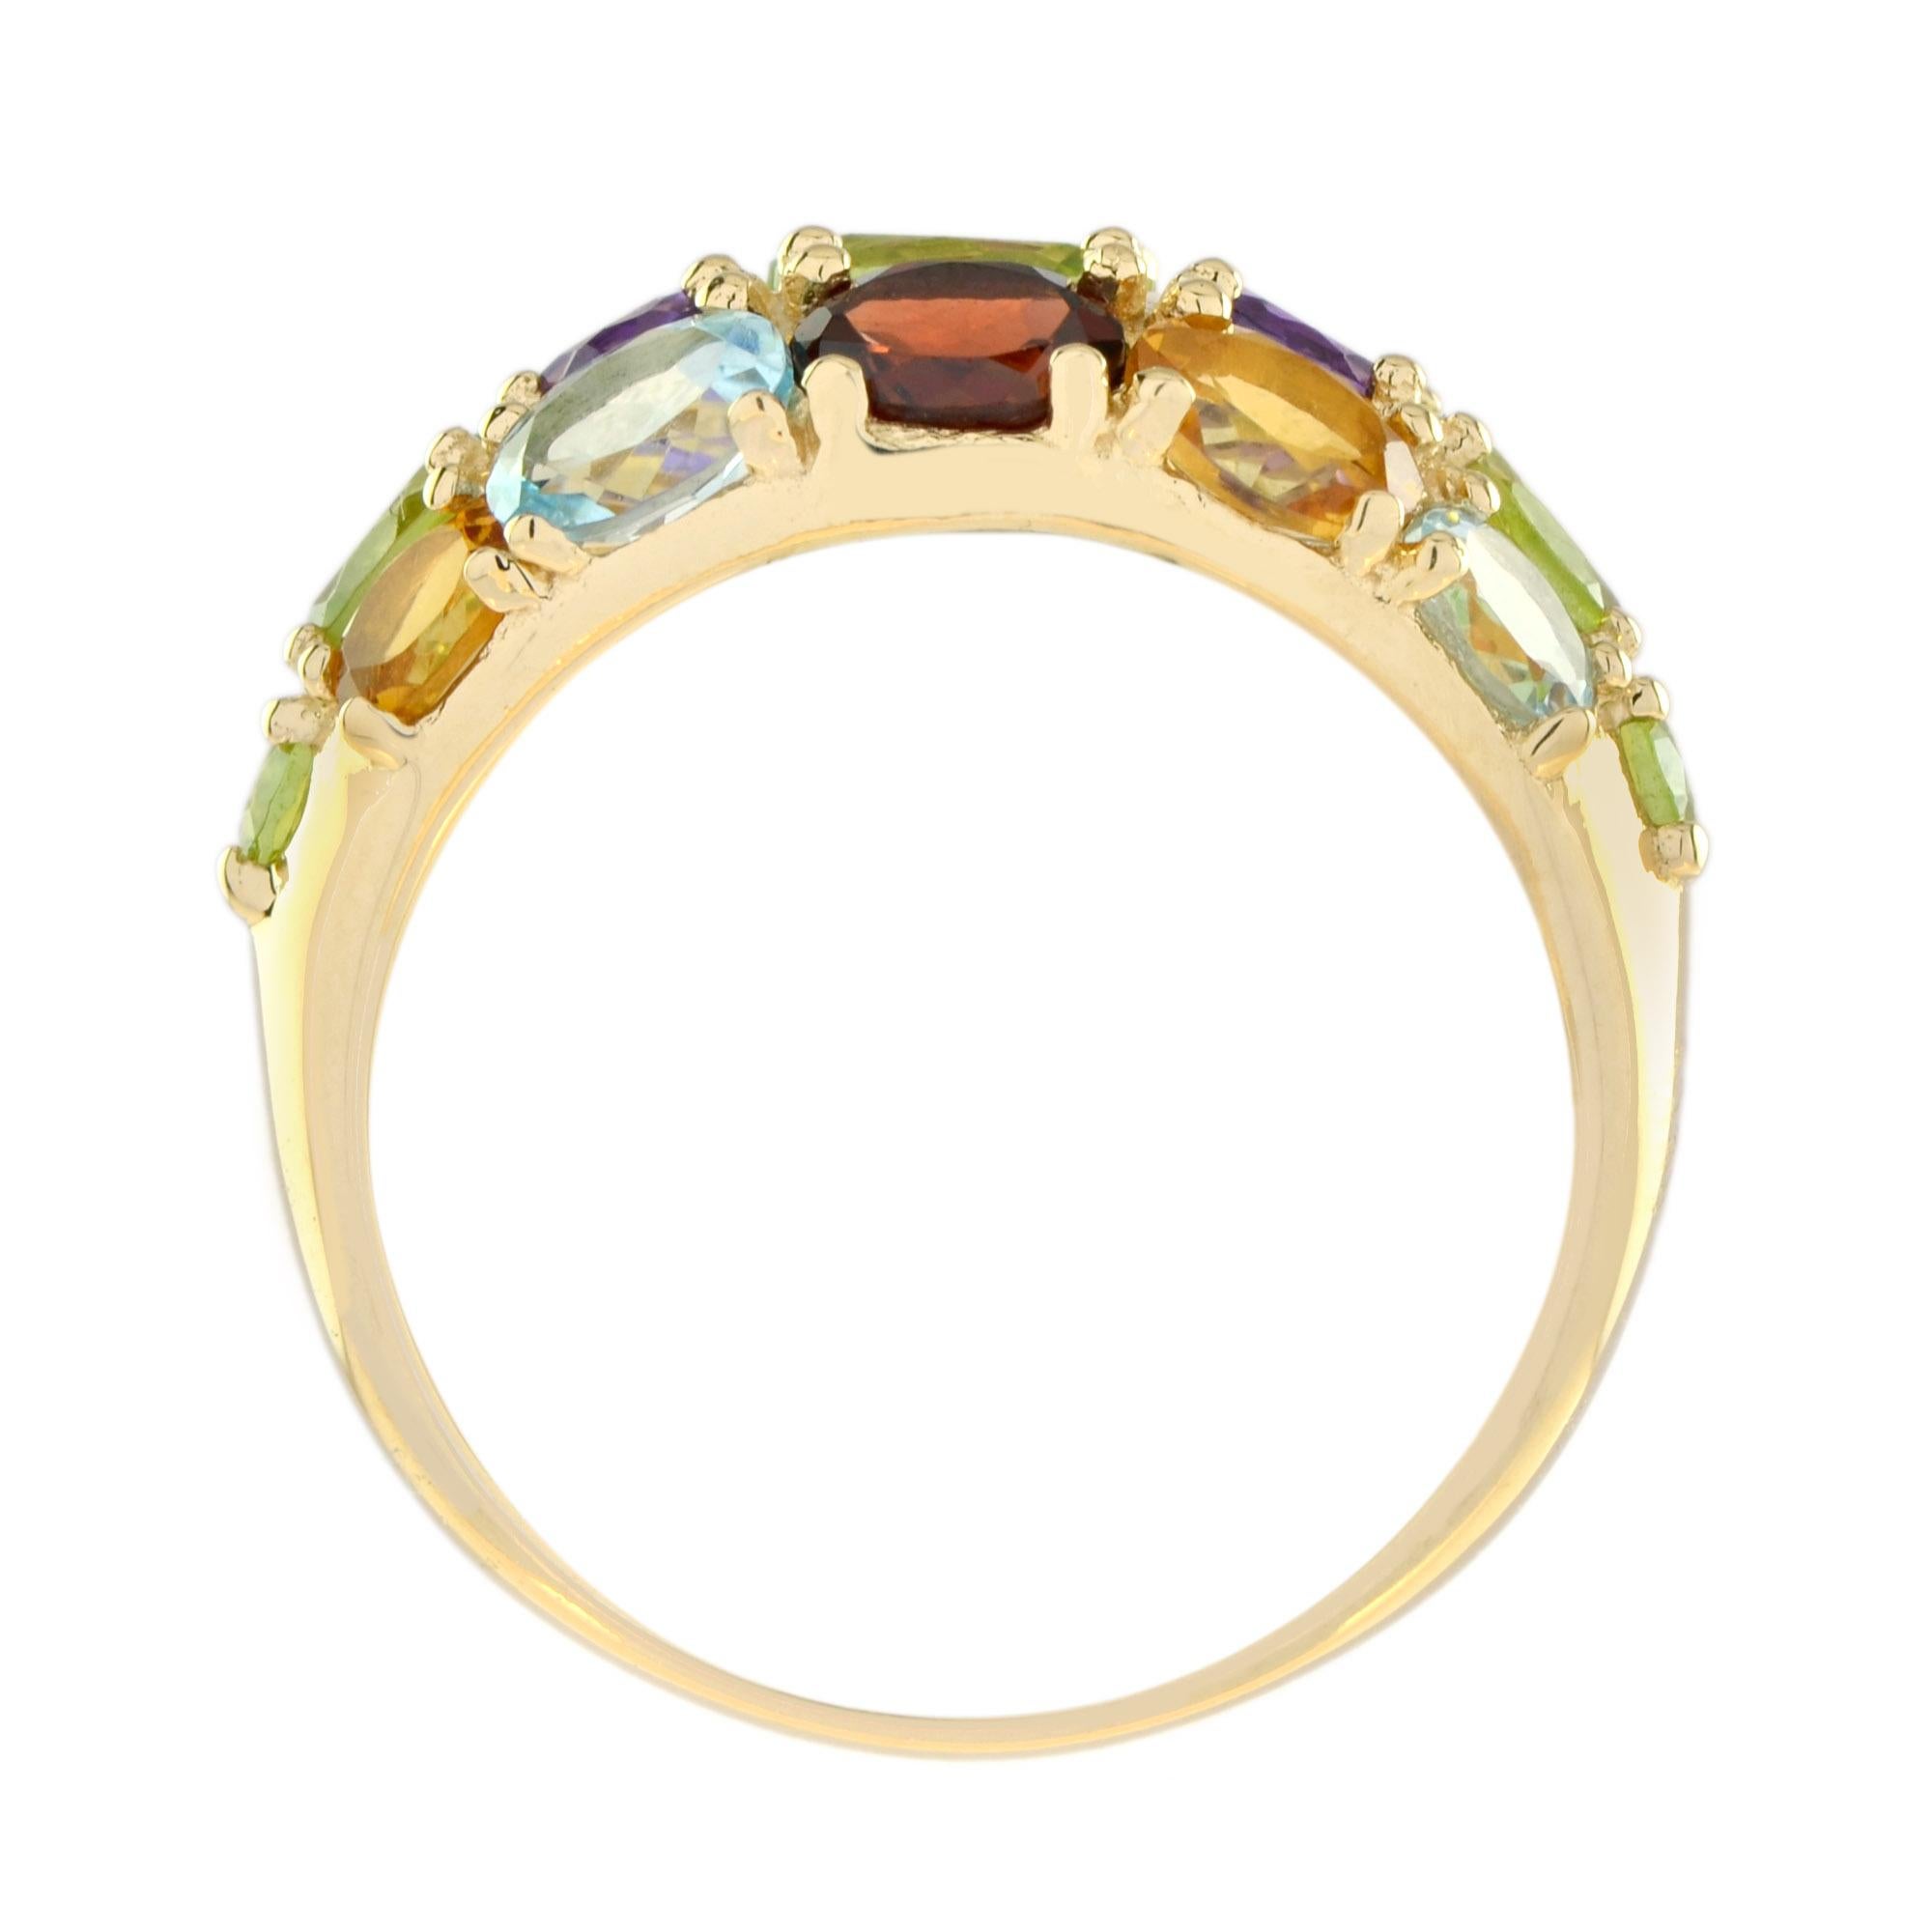 For Sale:  Vintage Style Multi Gemstone Cocktail Ring in 14K Yellow Gold 6